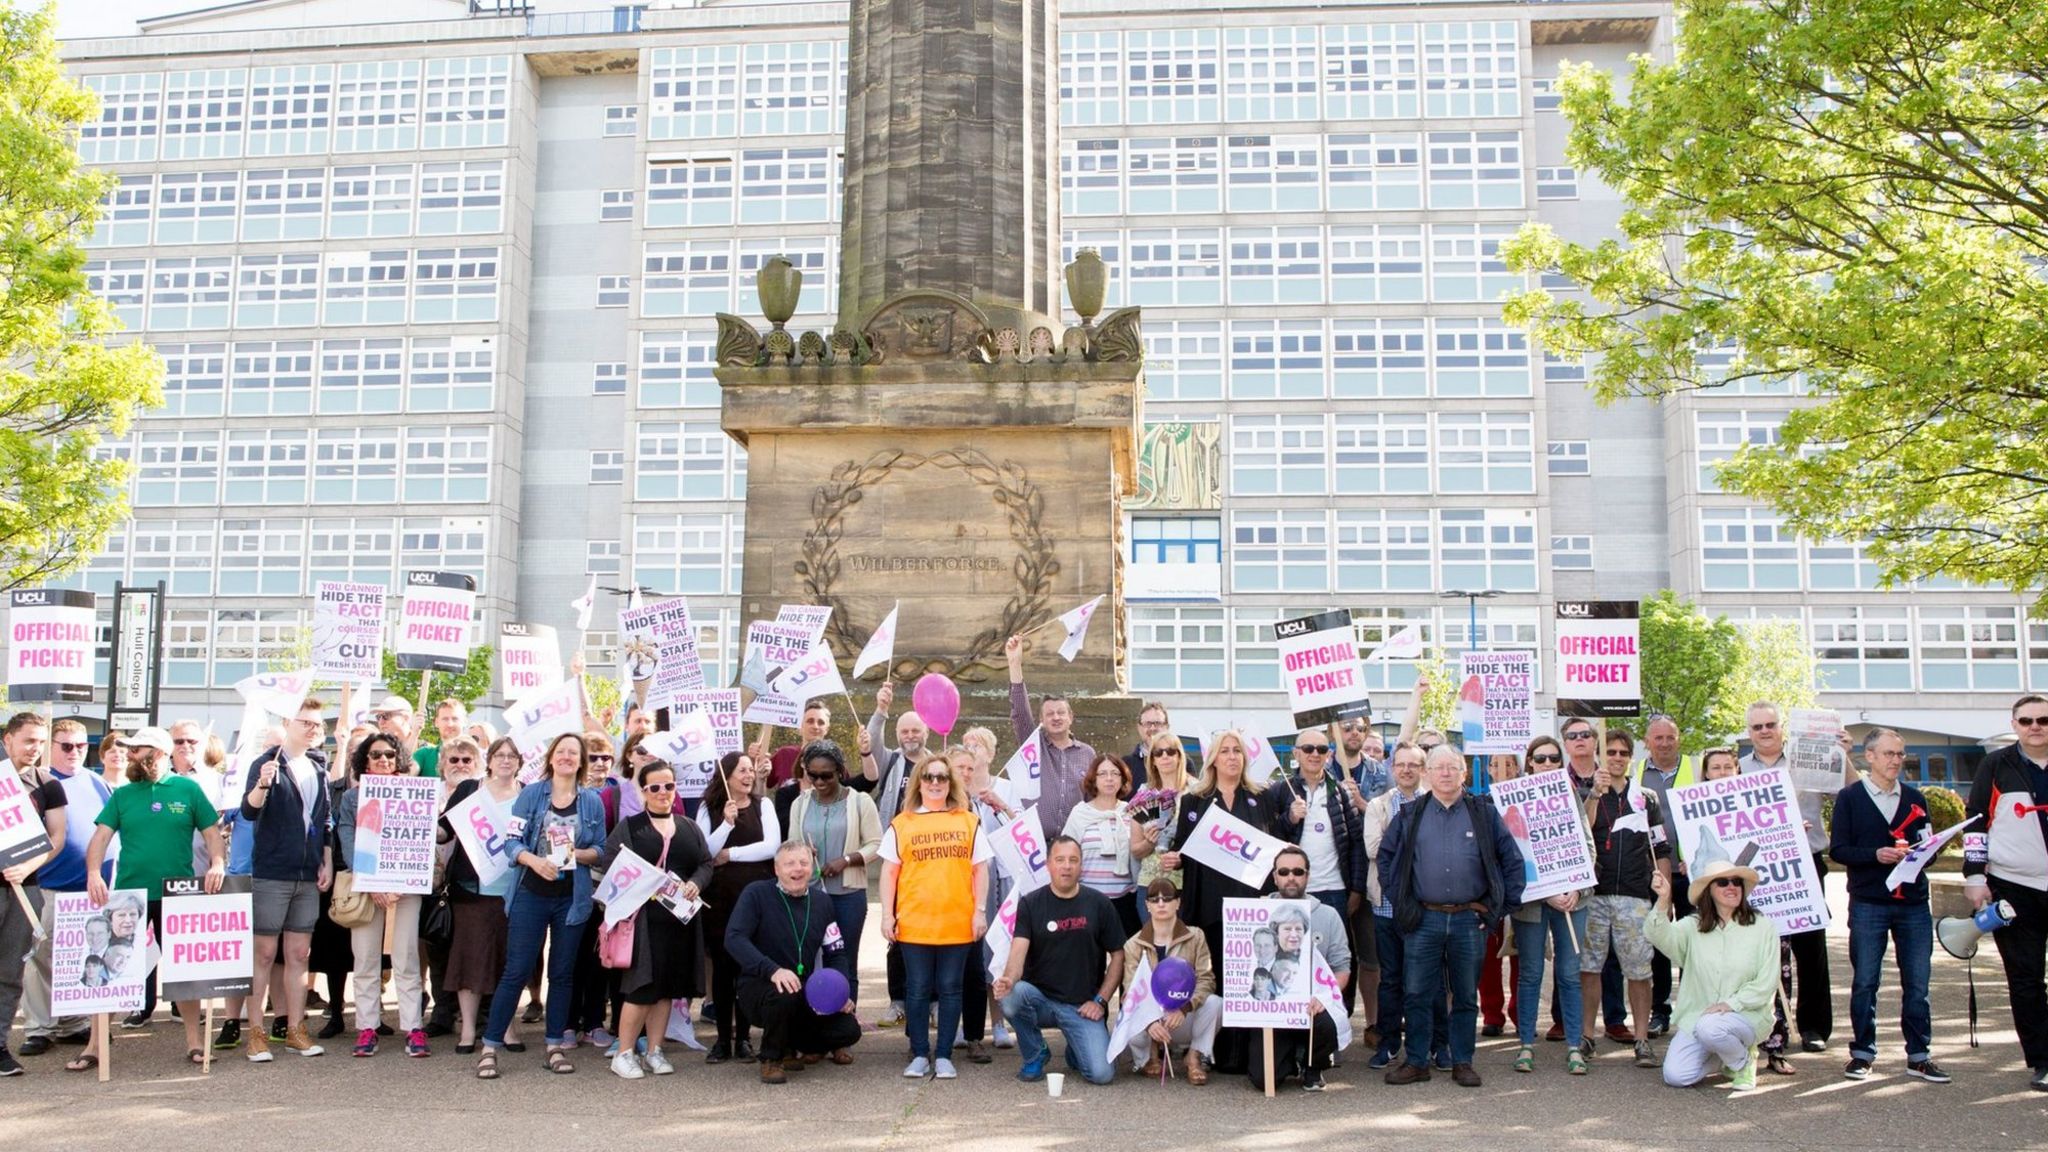 Hull college staff protesting against job losses